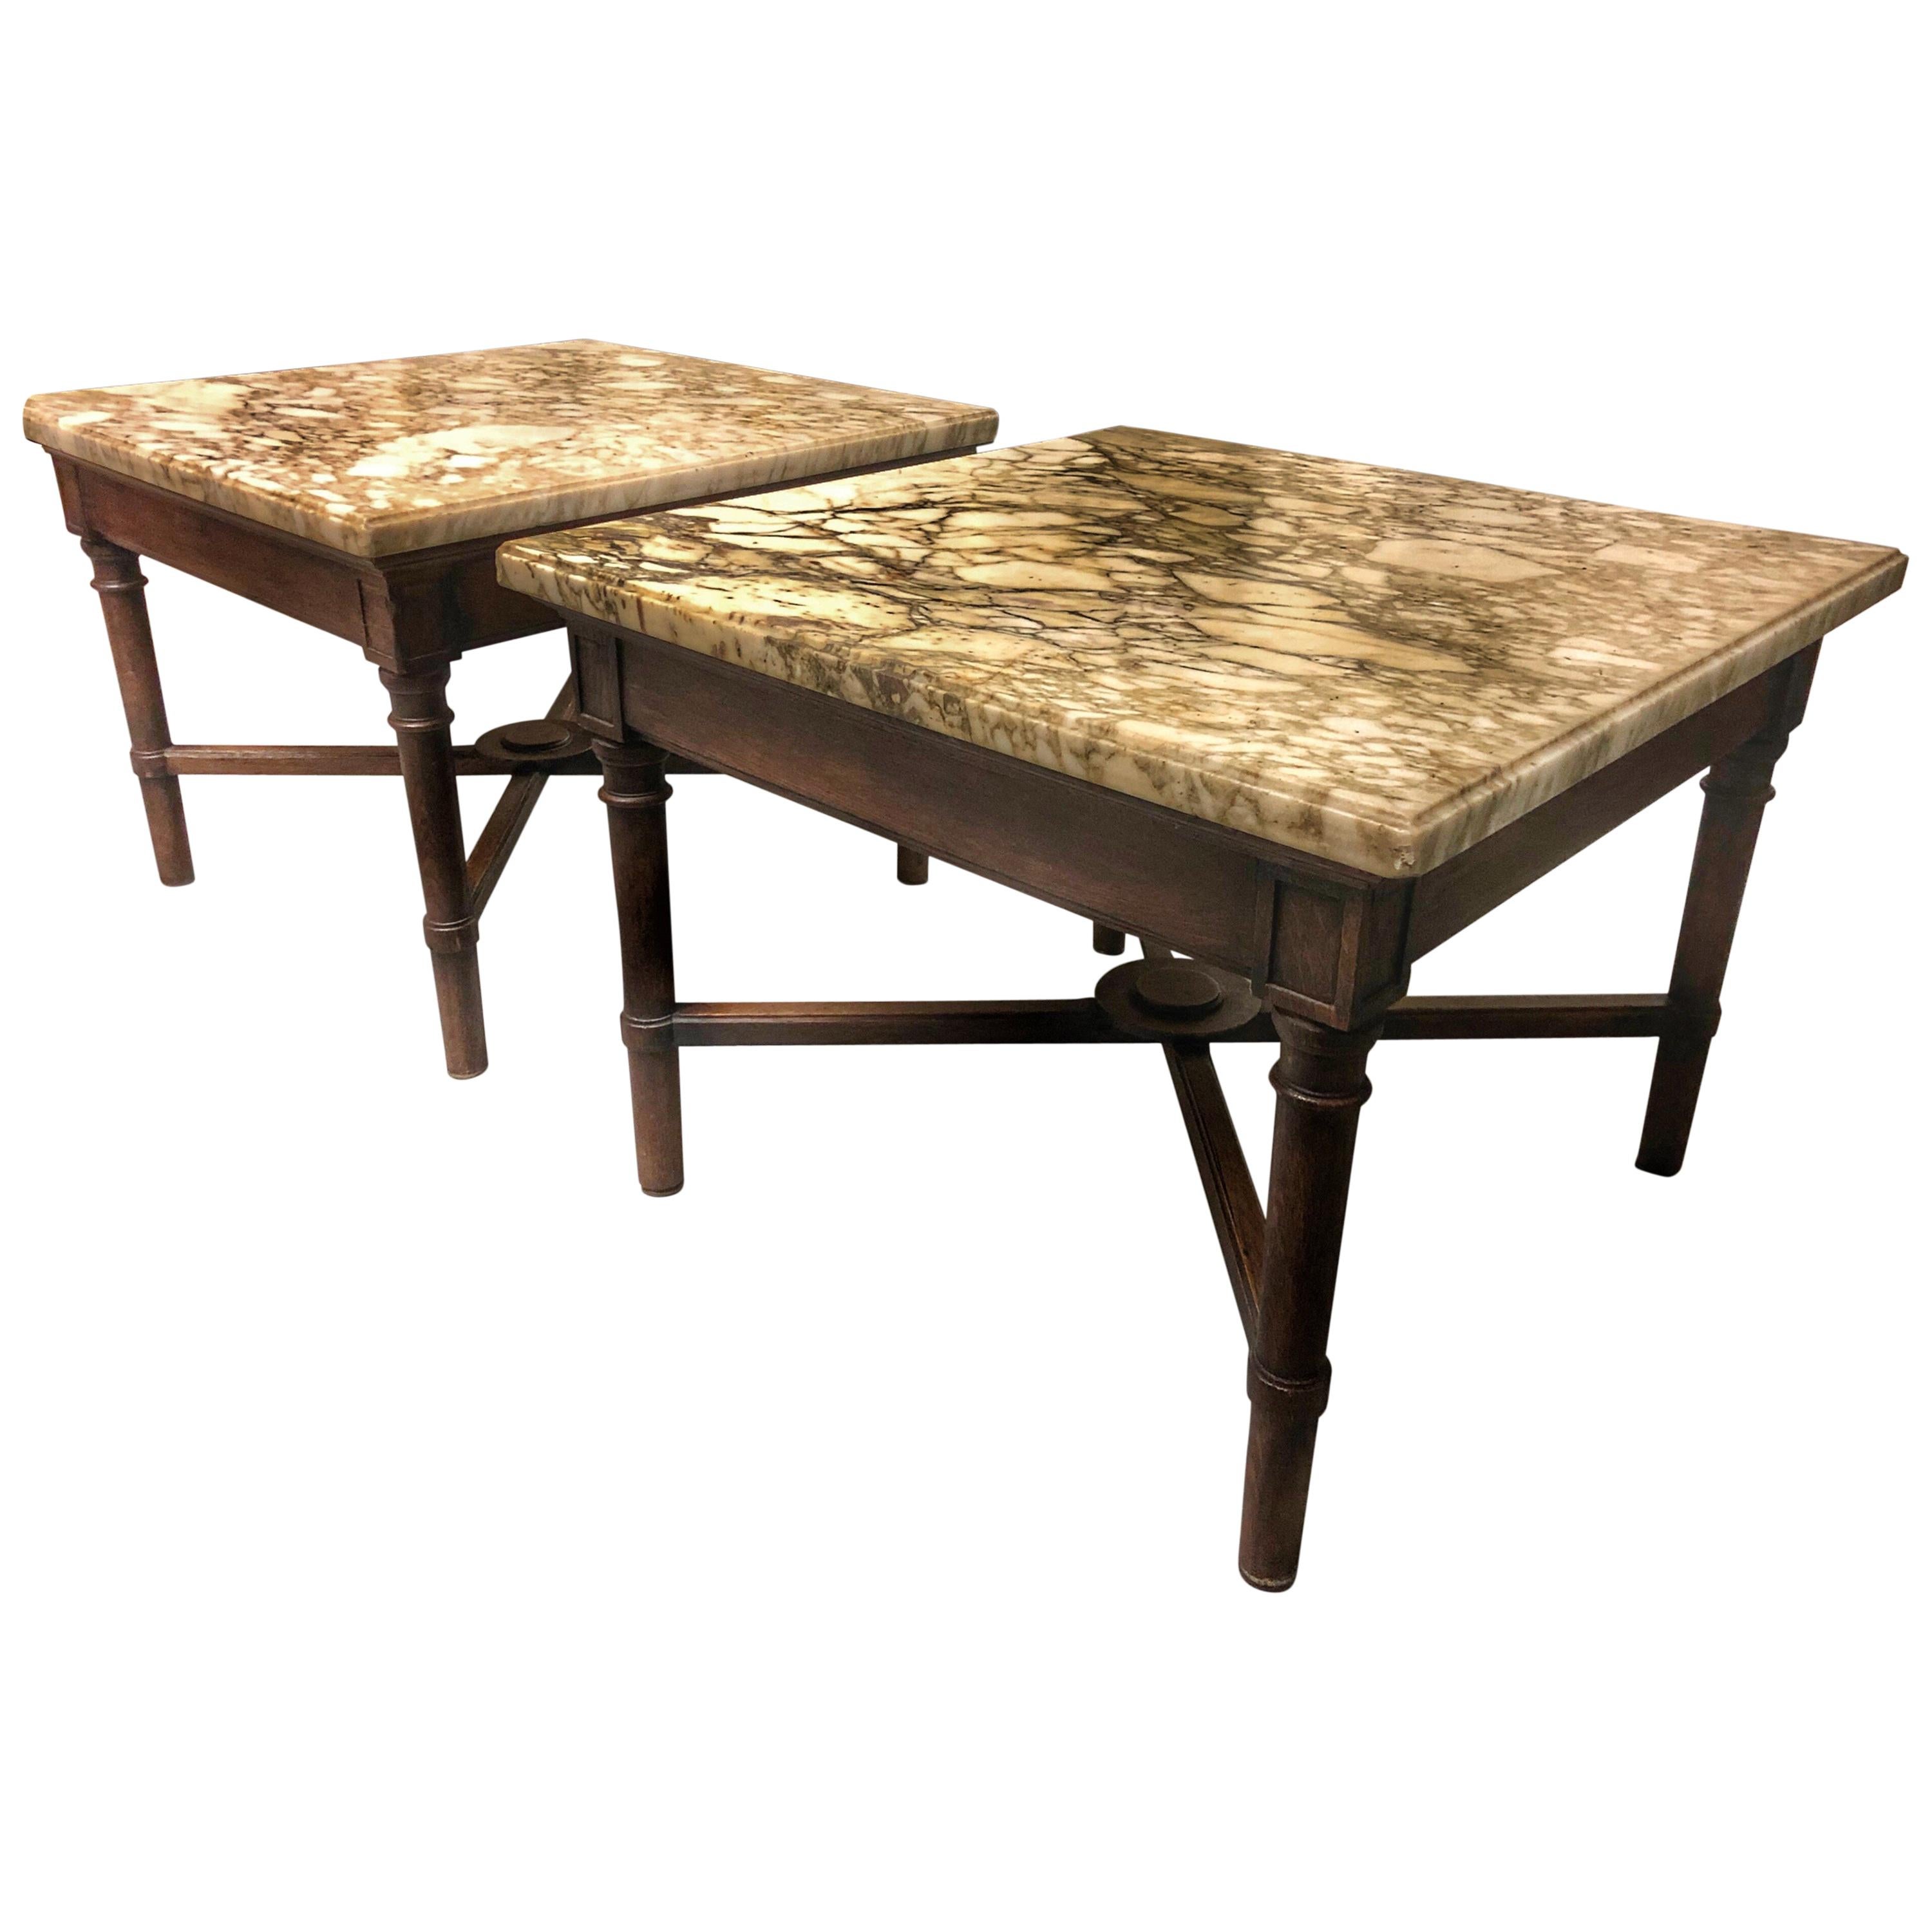 Two Low Square Wood Marble Tables, France, circa 1960